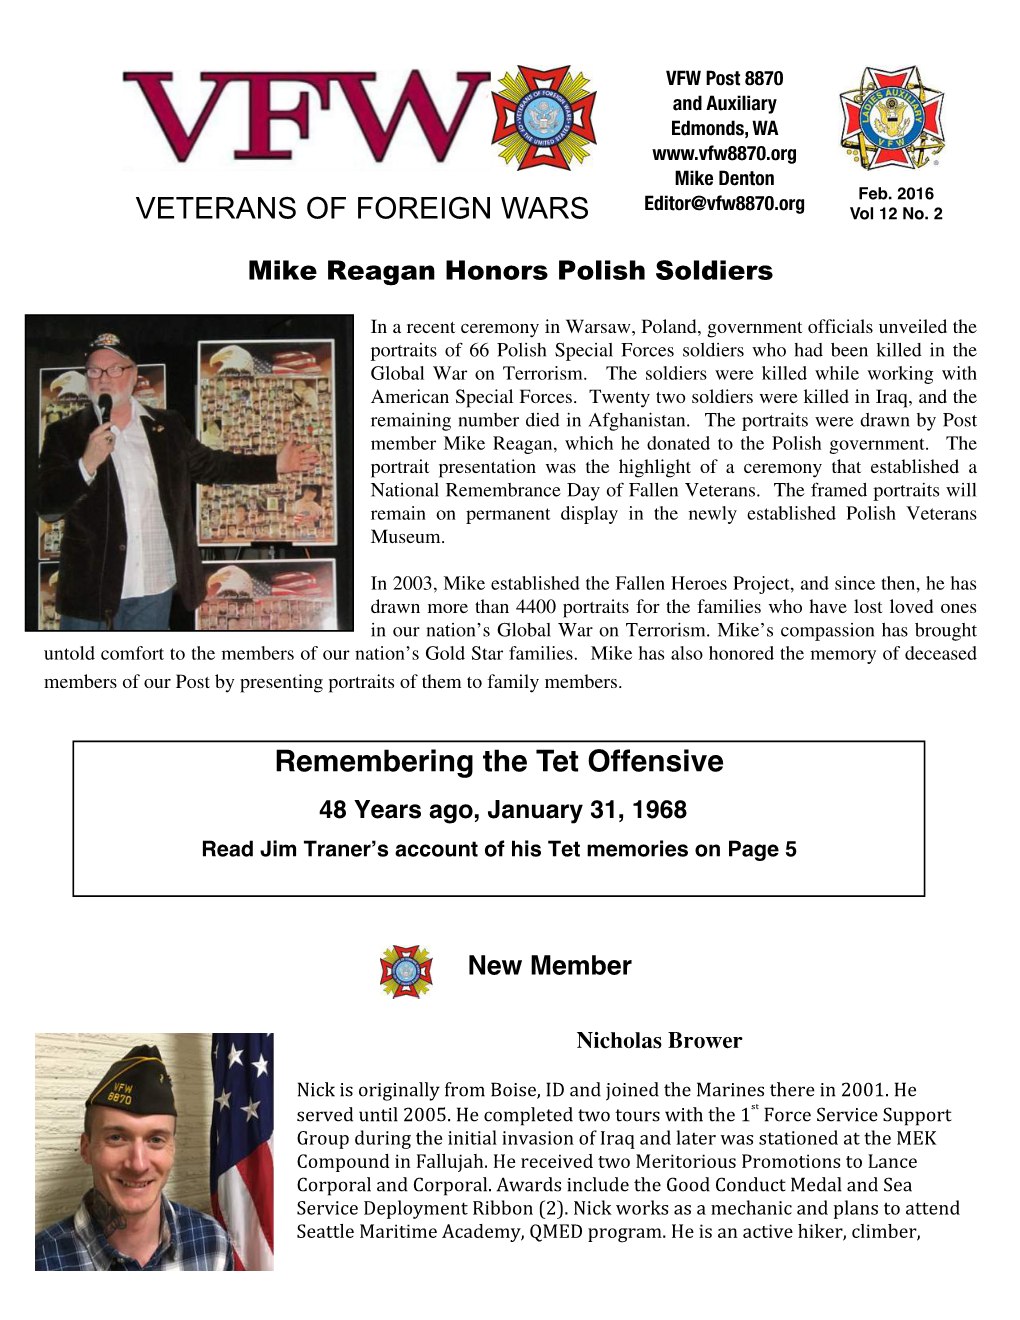 VETERANS of FOREIGN WARS Remembering the Tet Offensive